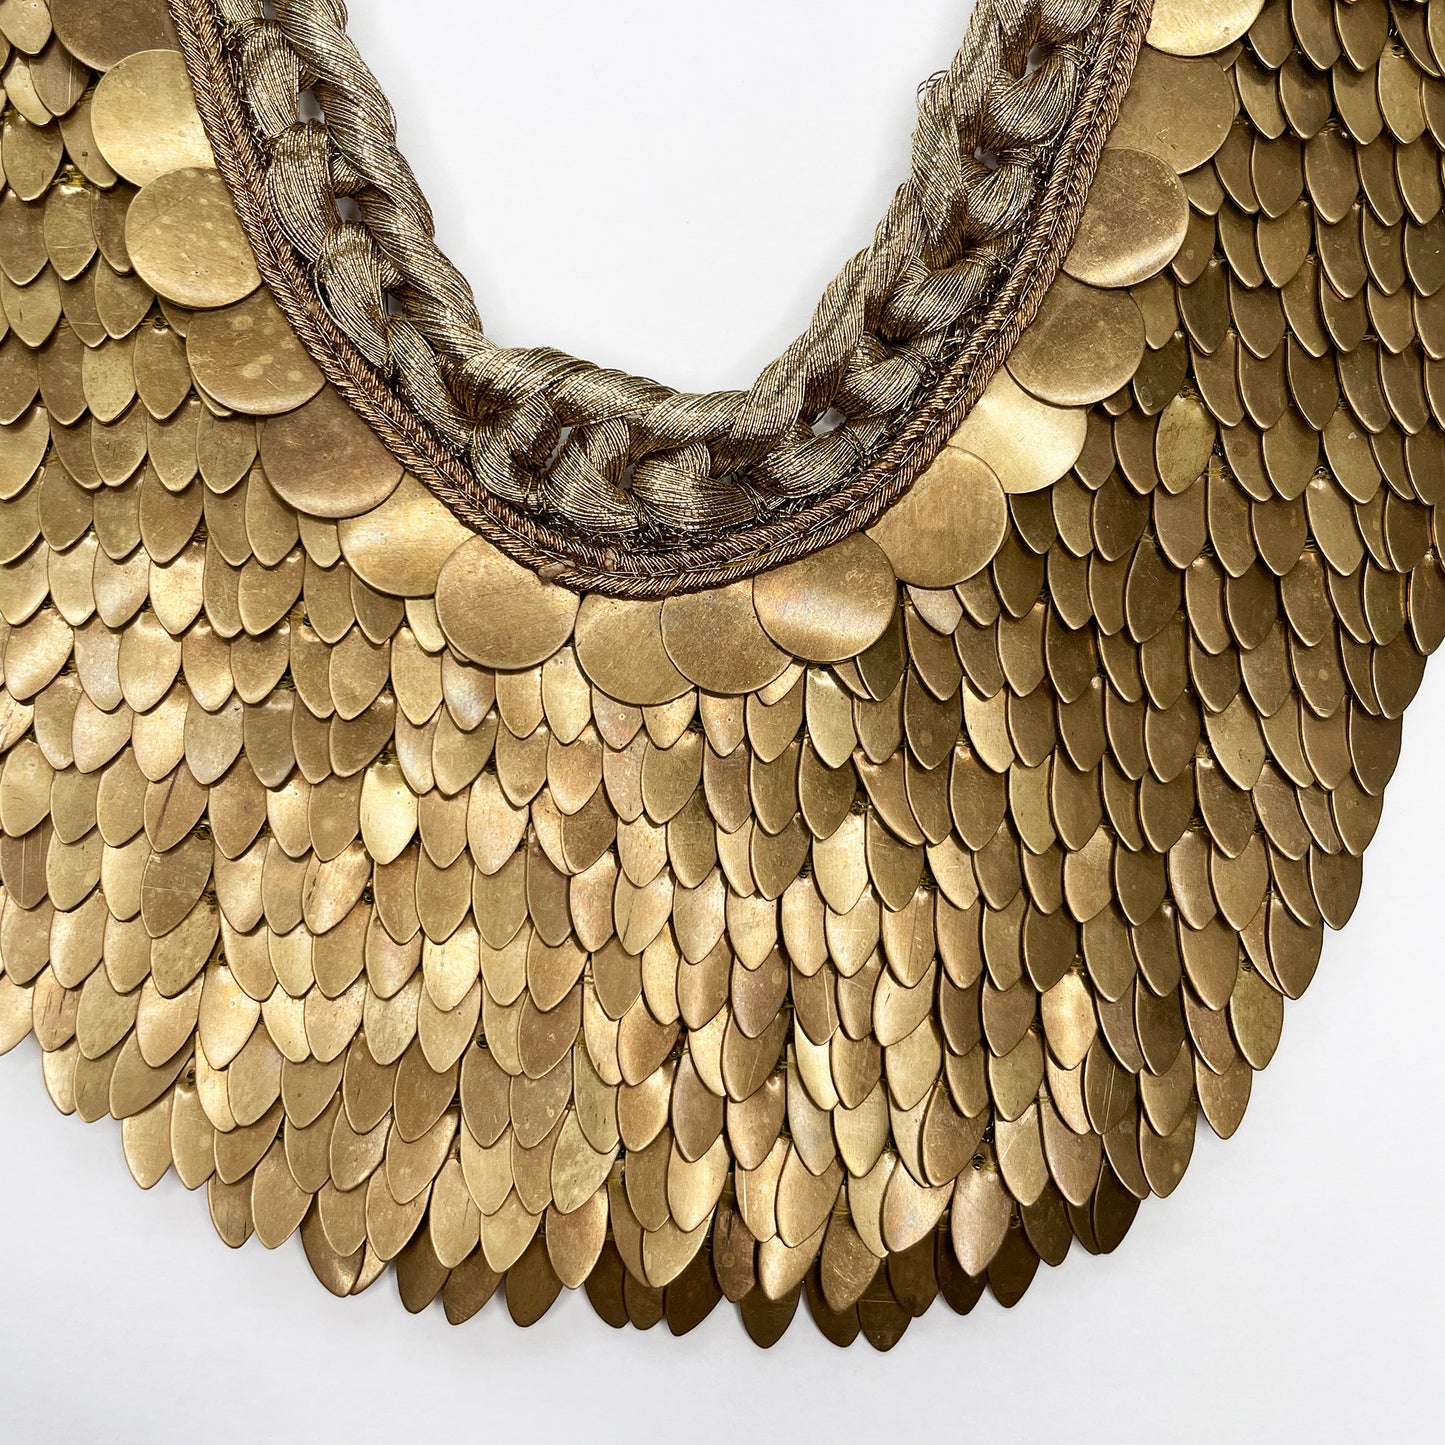 Cleopatra Gold Statement Necklace